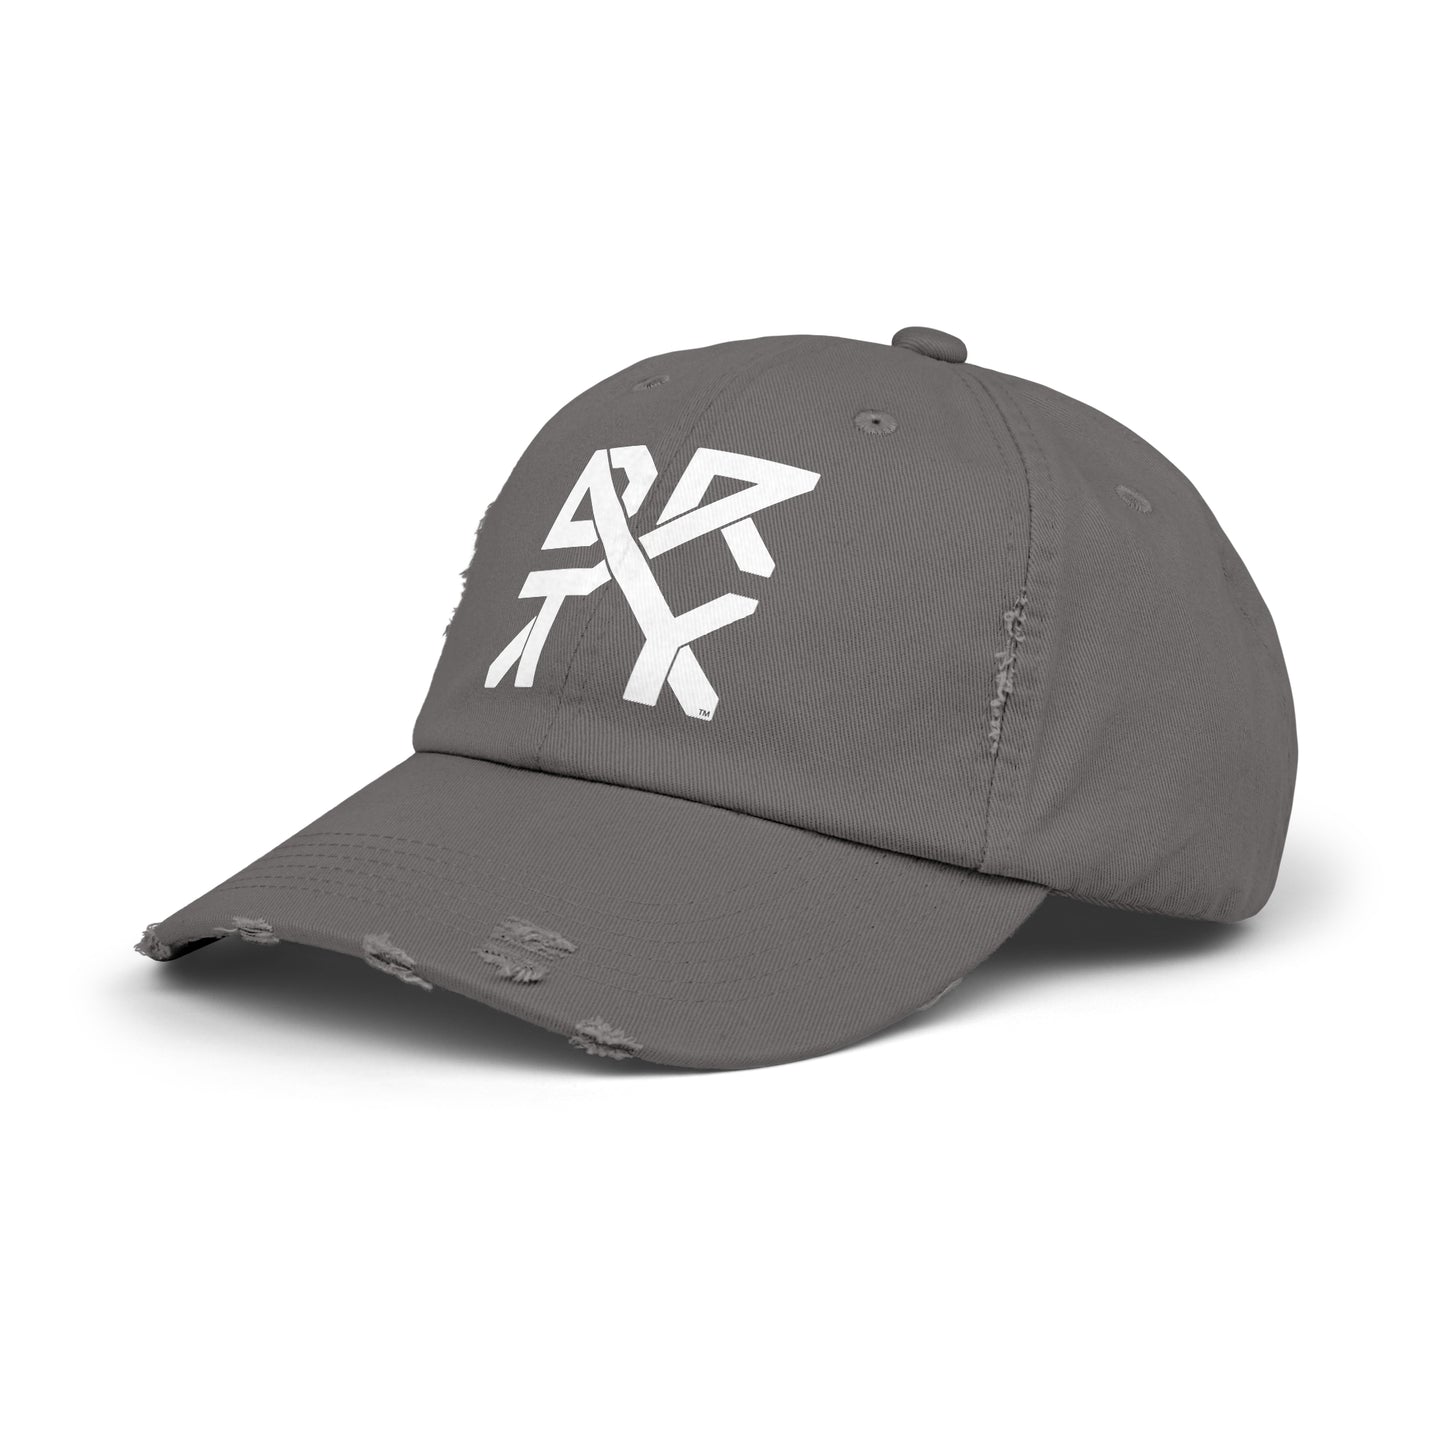 This image showcases the 3/4 view of a hat with the logo DRTYX in the center of the hat.